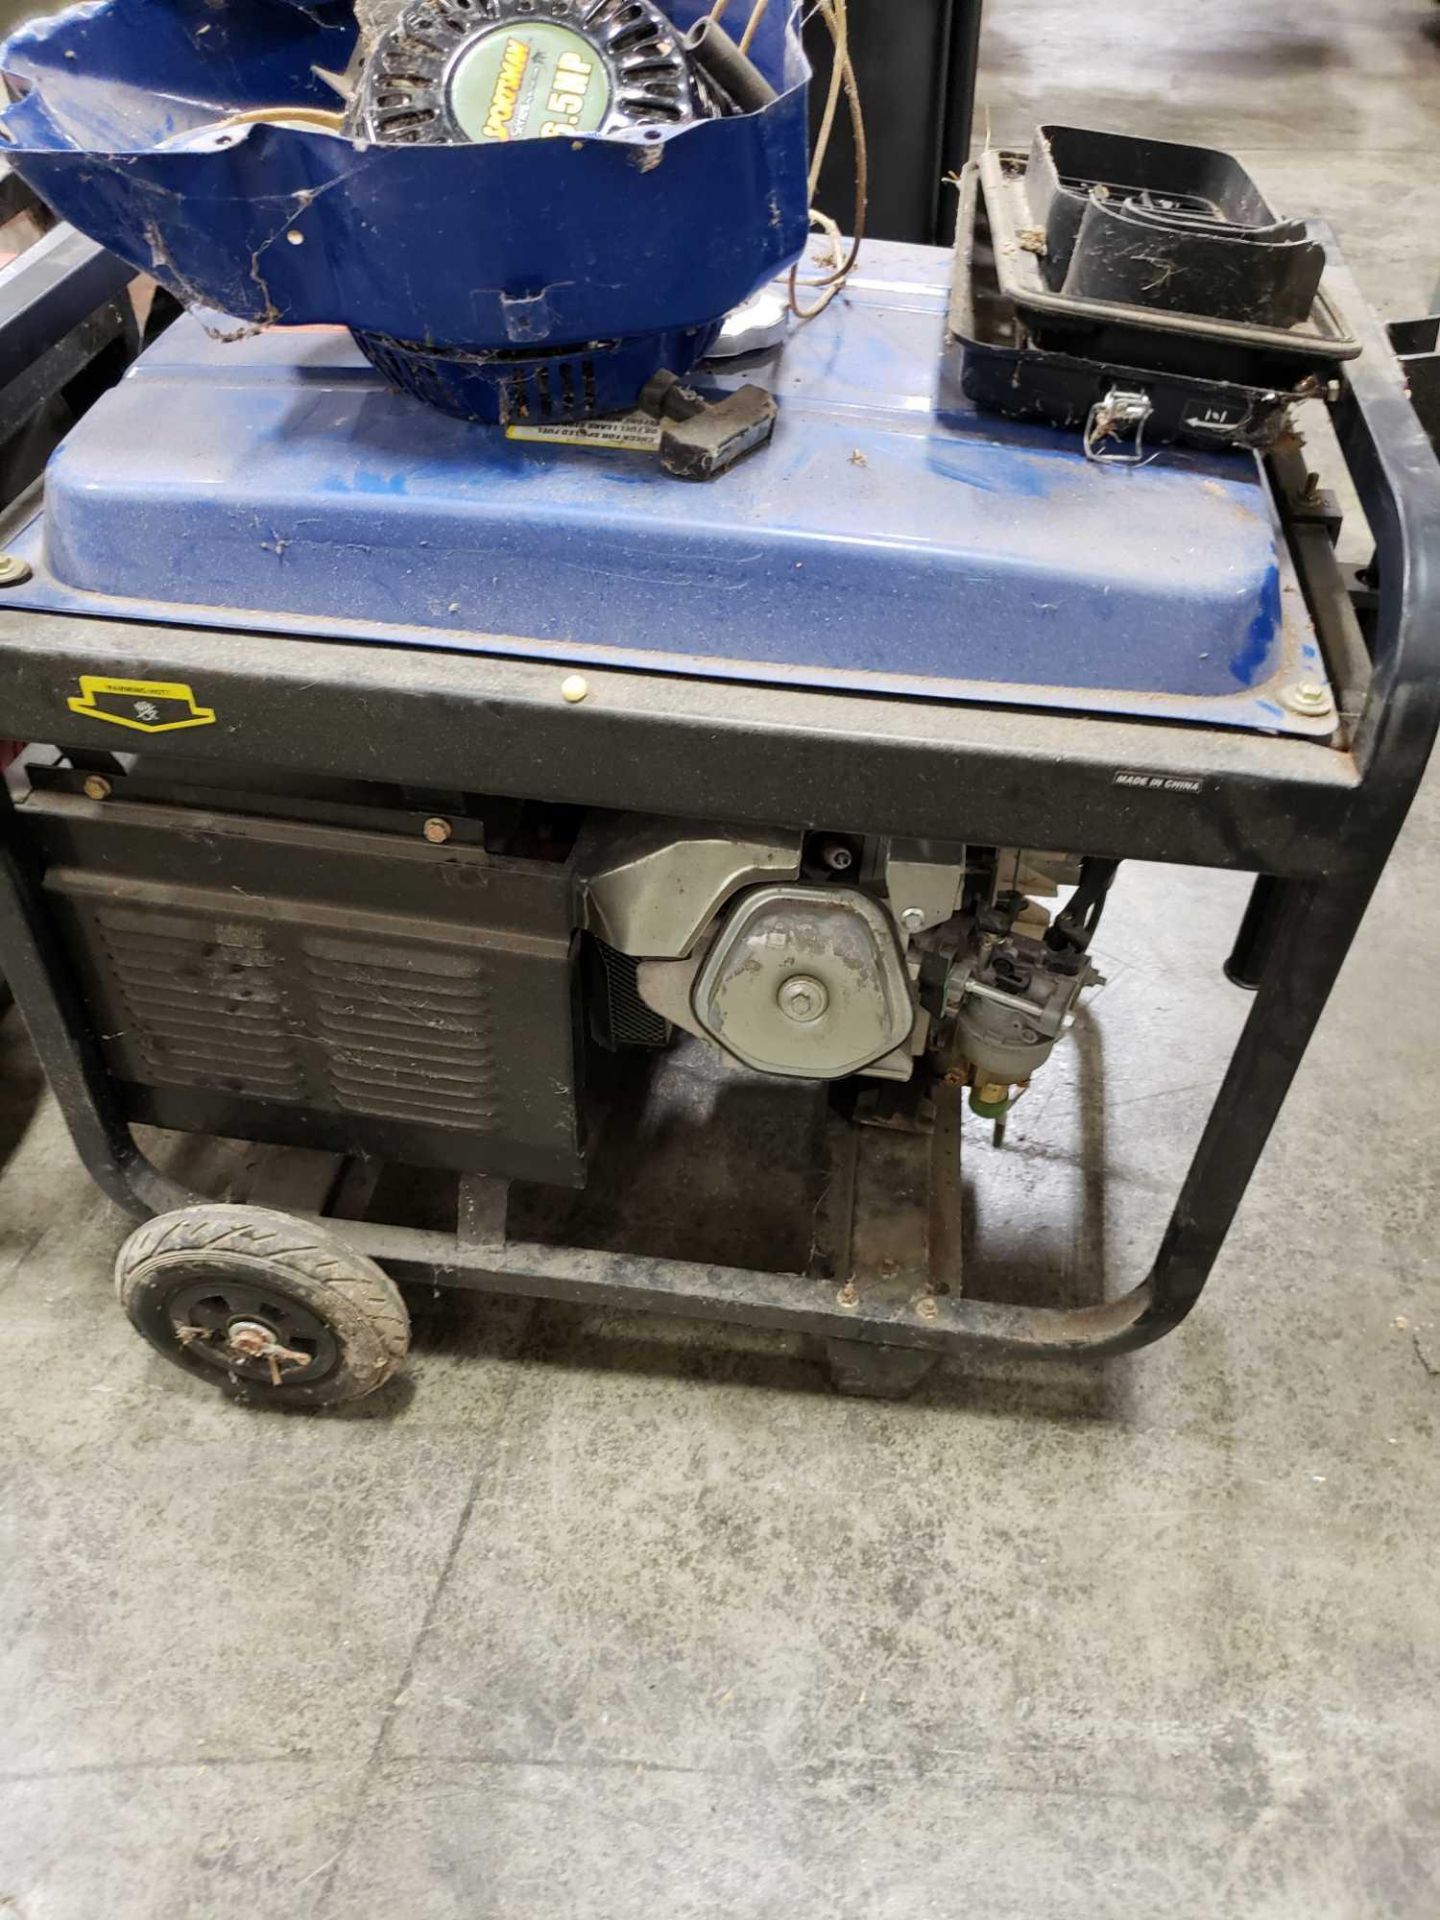 Qty 3 - 6500e gas generator. Consignor states all need work. - Image 8 of 8